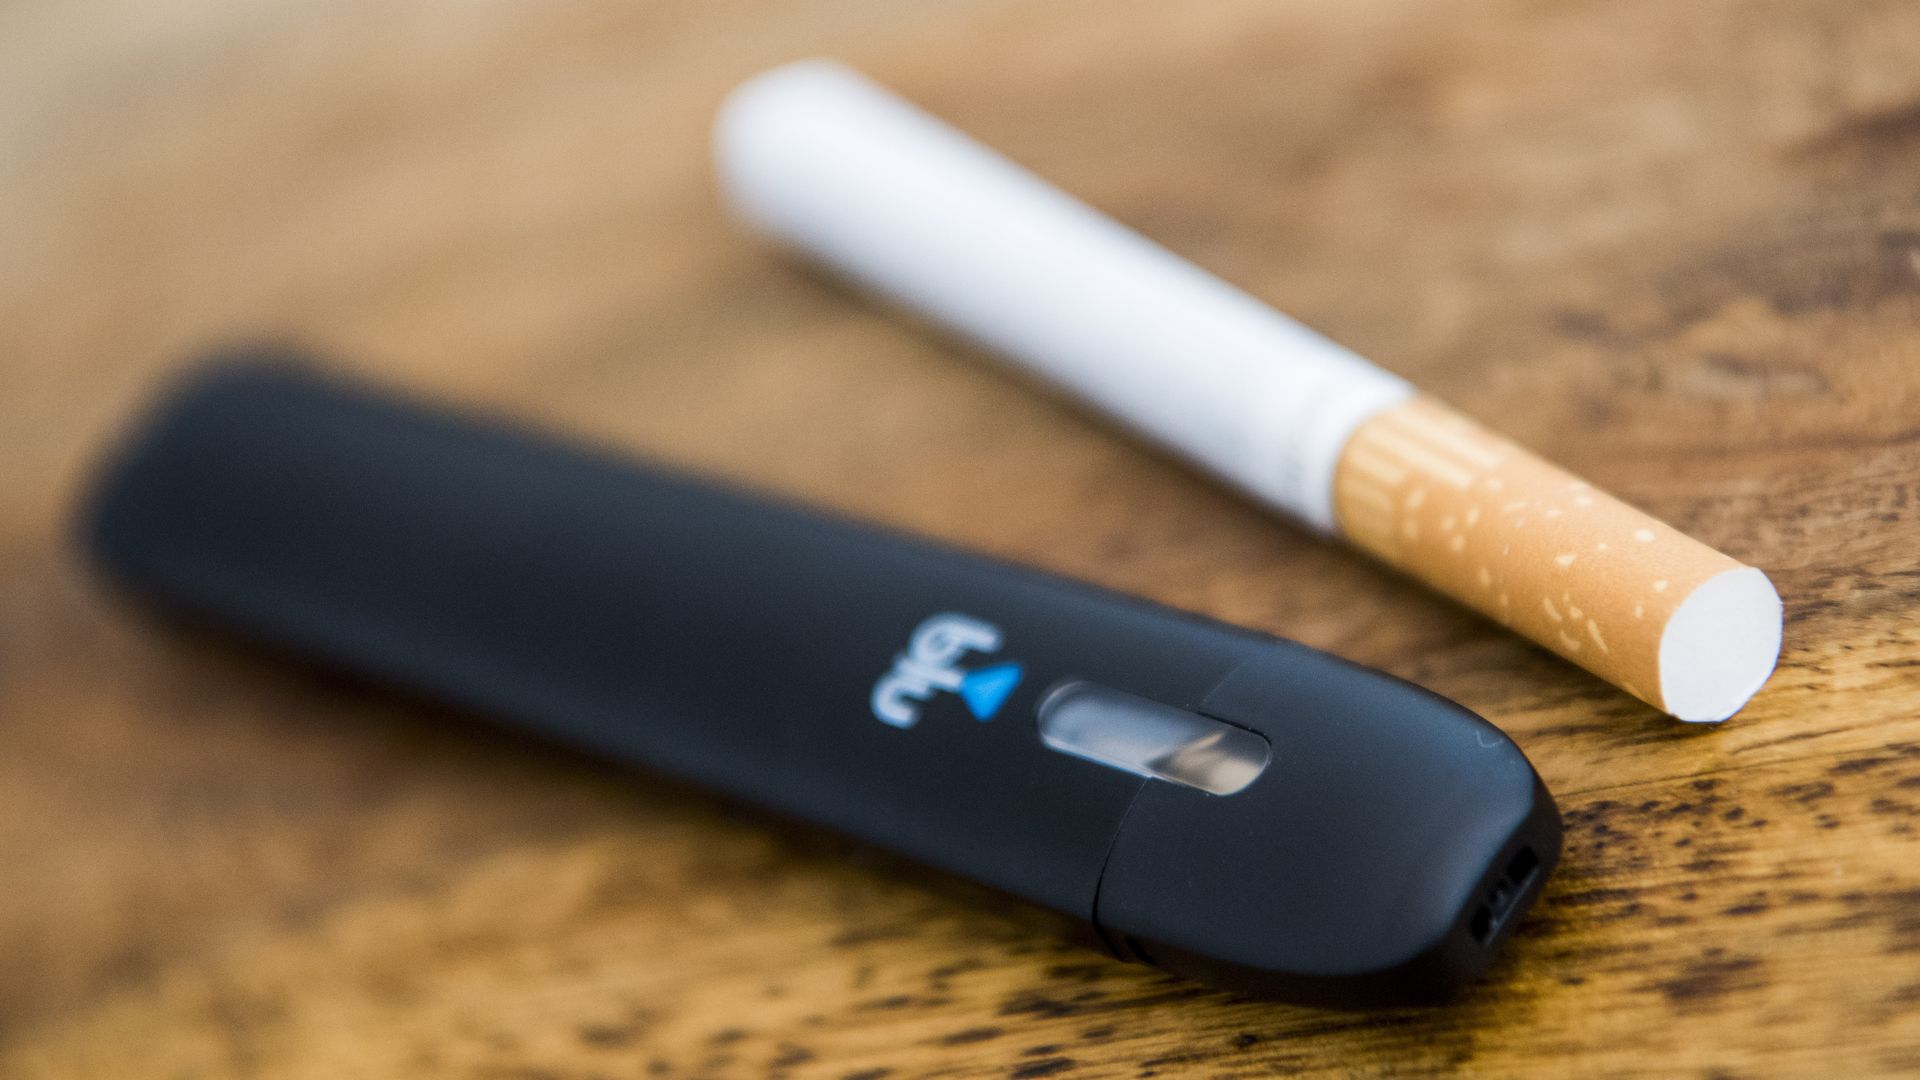 Photo of an e-cigarette next to tobacco combustible cigarette on table